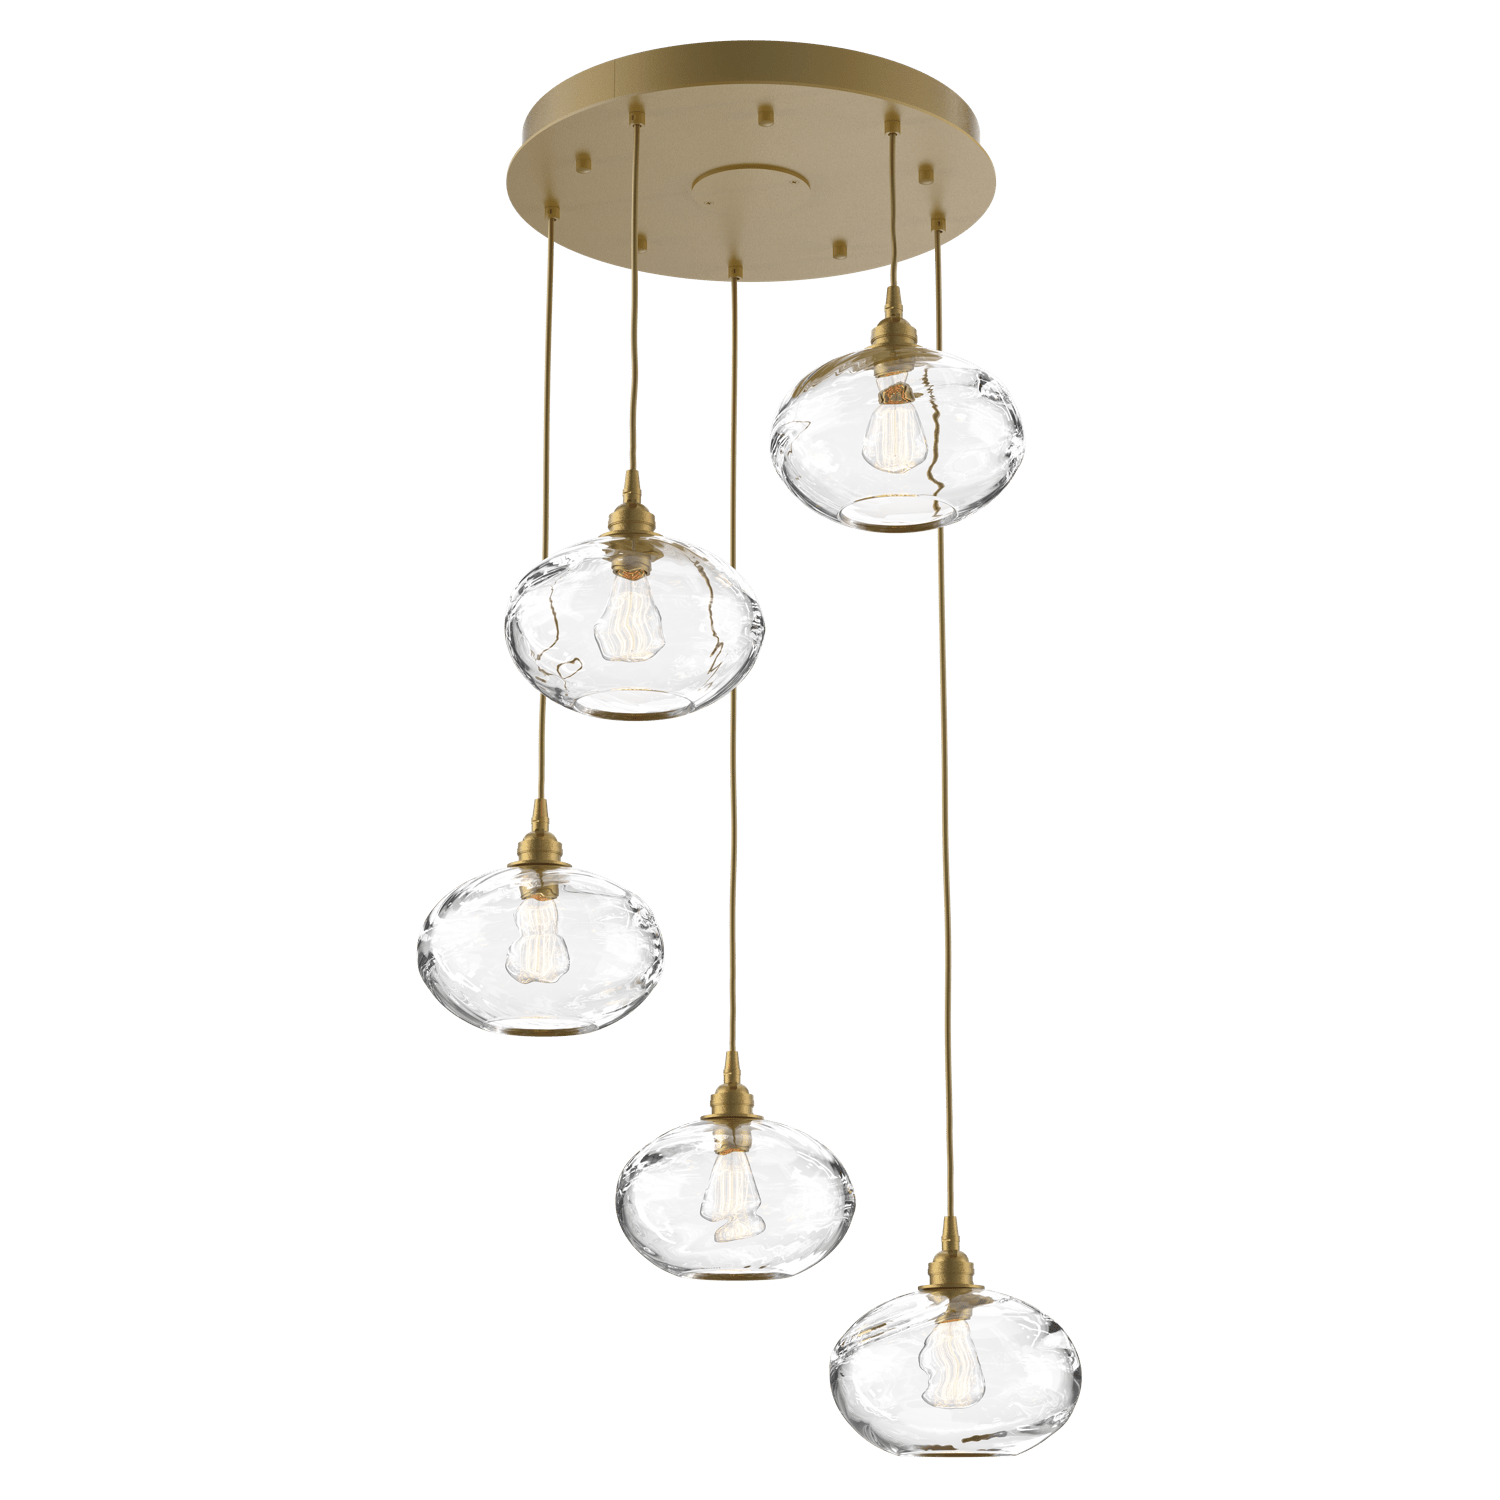 CHB0036-05-GB-OC-Hammerton-Studio-Optic-Blown-Glass-Coppa-5-light-round-pendant-chandelier-with-gilded-brass-finish-and-optic-clear-blown-glass-shades-and-incandescent-lamping